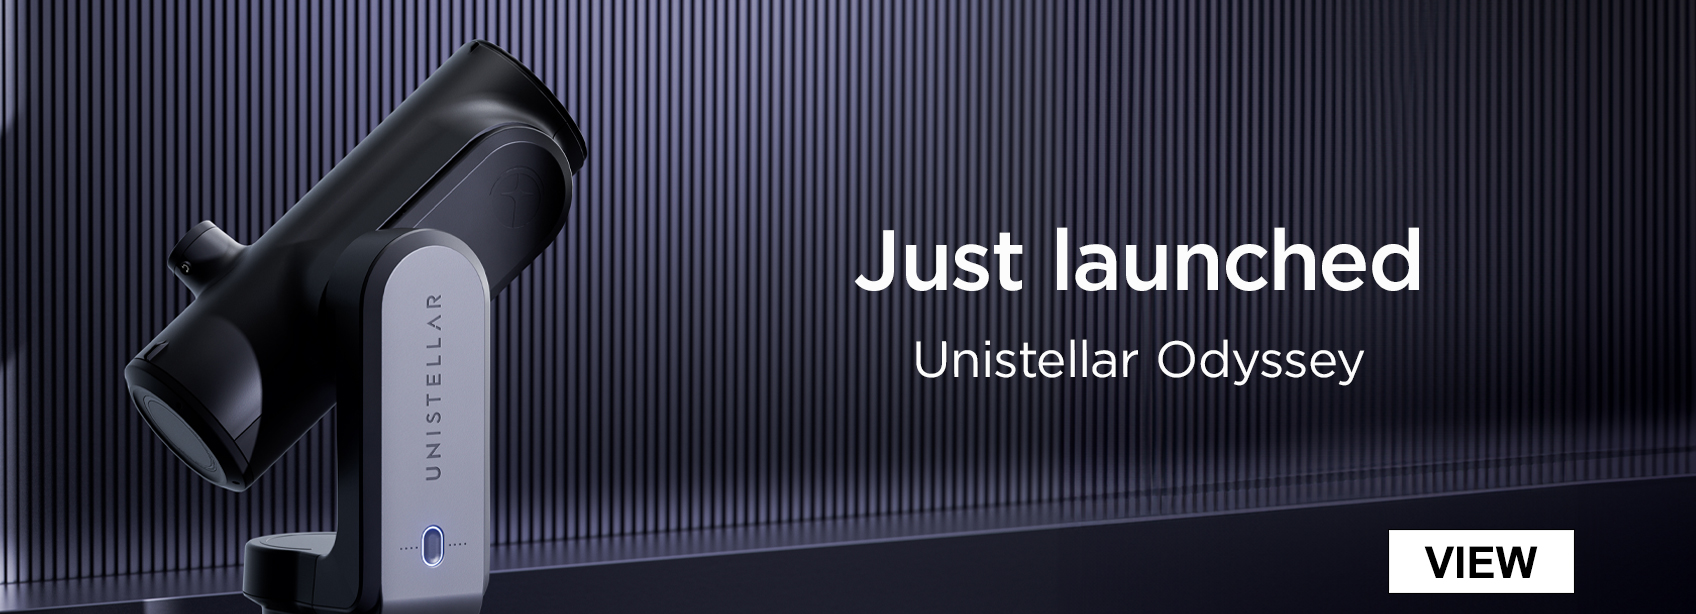 Just Launched Unistellar Odyssey